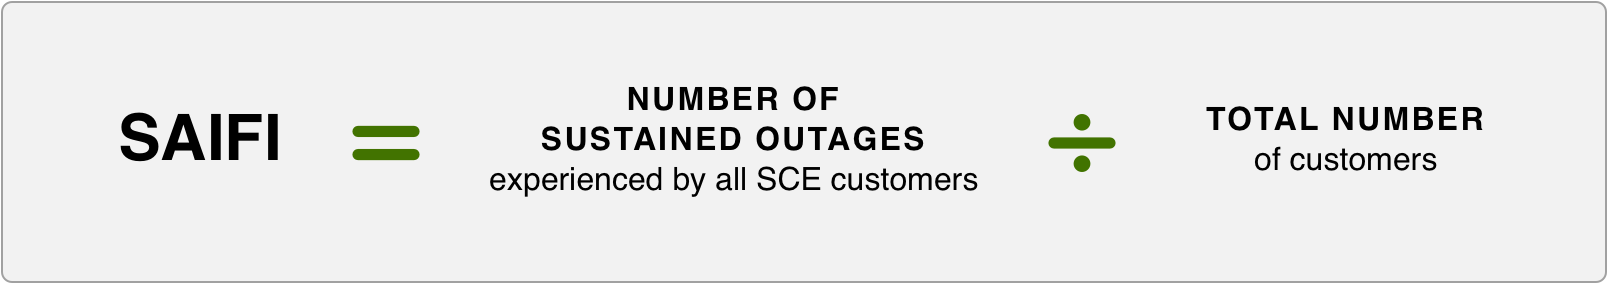 SAIFI equals Minutes without power divided by number of customers